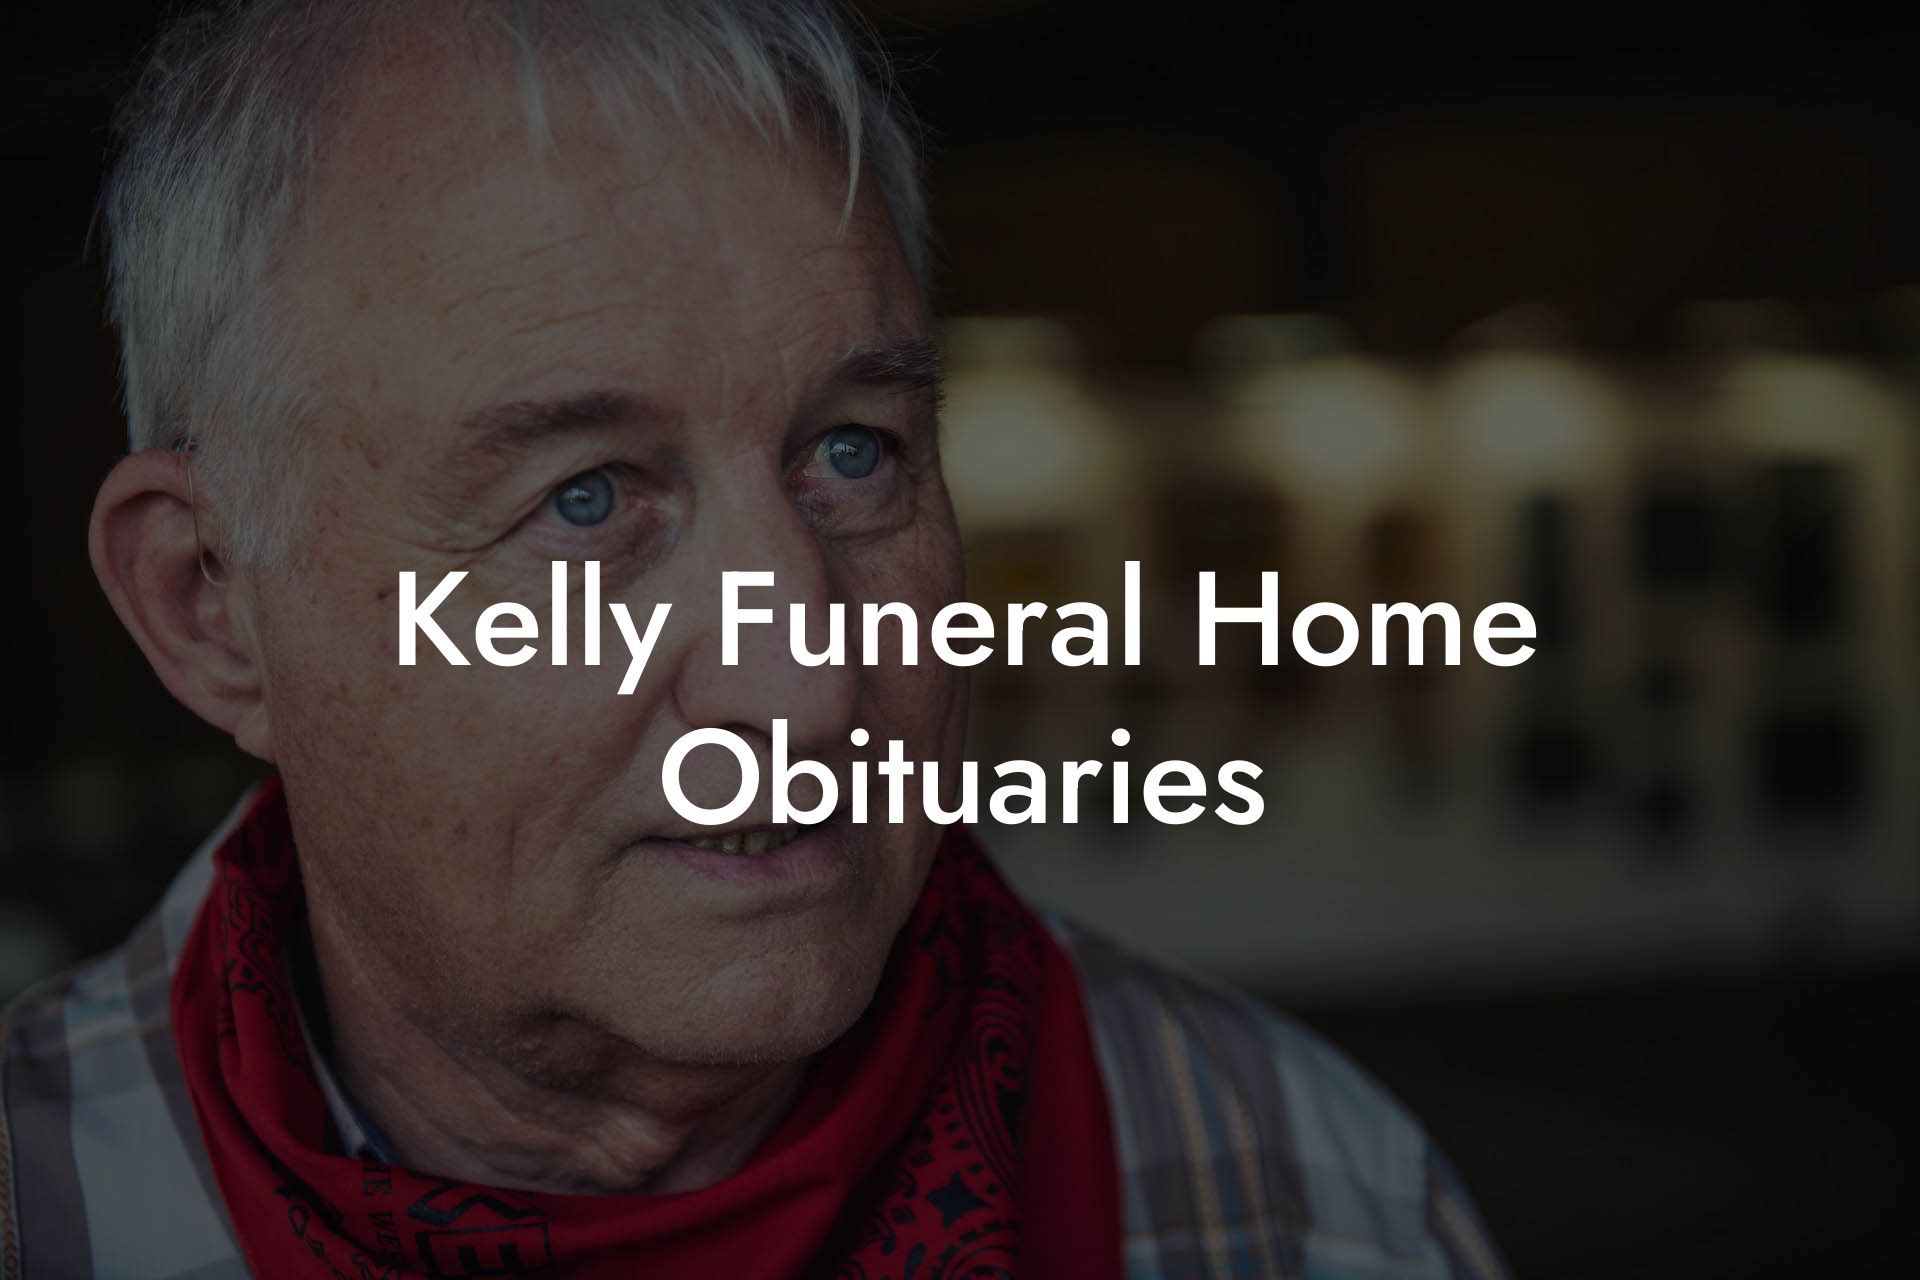 Kelly Funeral Home Obituaries